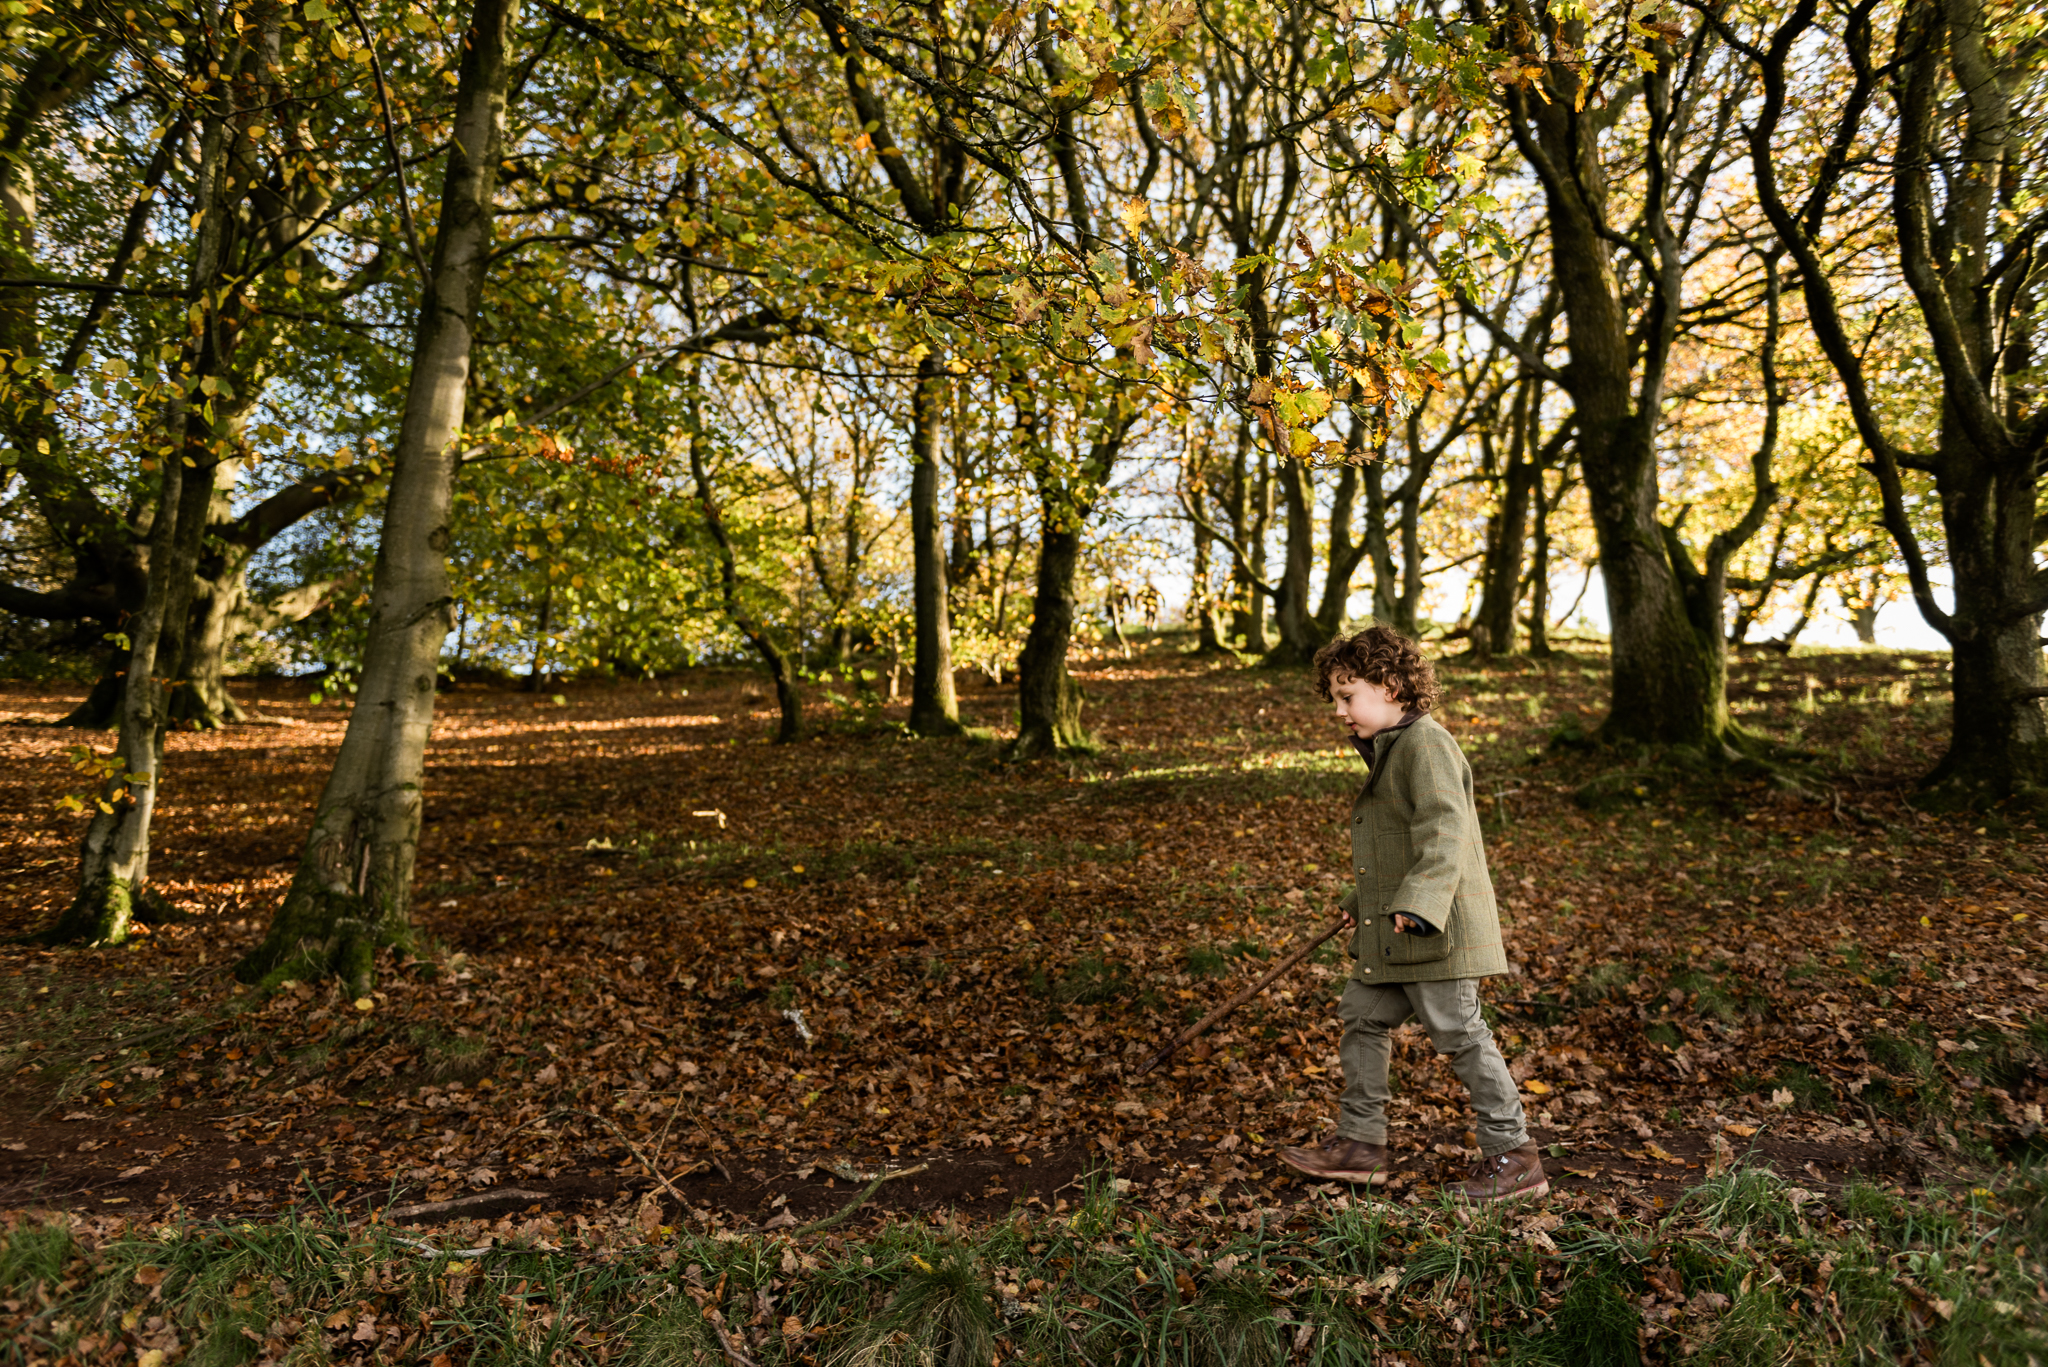 Autumn Documentary Lifestyle Family Photography at Clent Hills, Worcestershire Country Park countryside outdoors nature - Jenny Harper-15.jpg